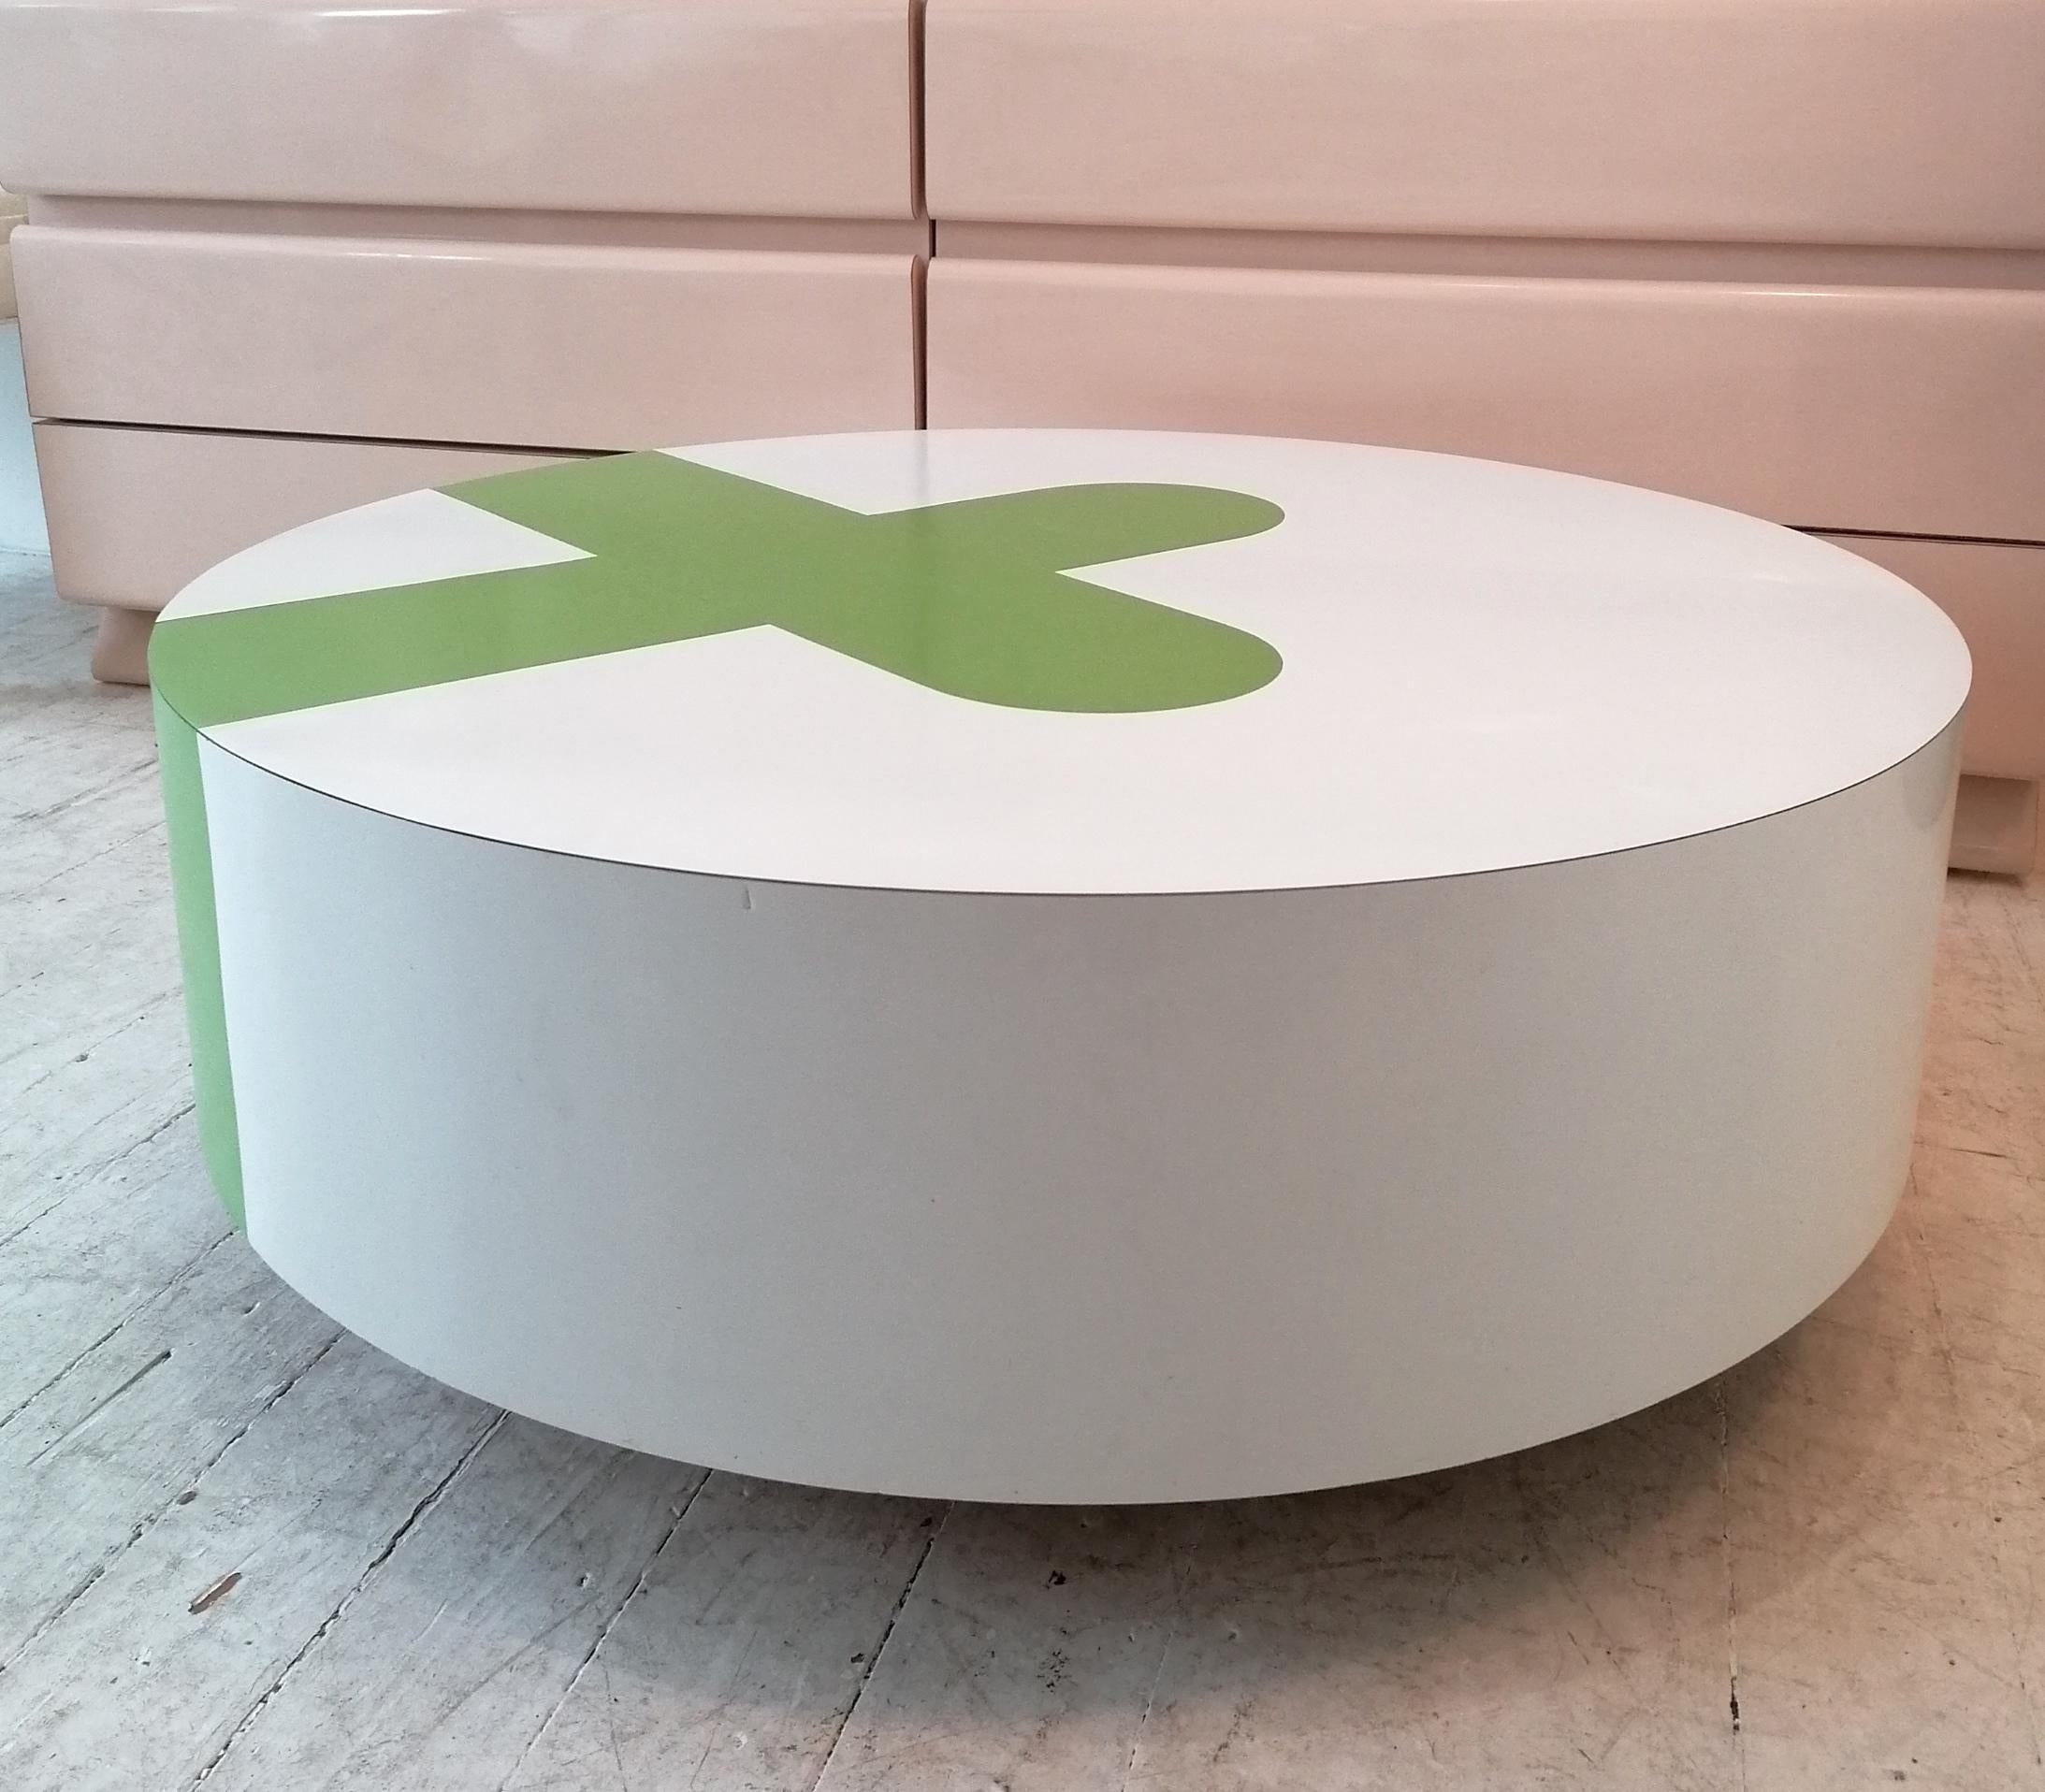 Large Postmodern White & Green Laminate Coffee Table on Casters, USA 1980s 1990s For Sale 1